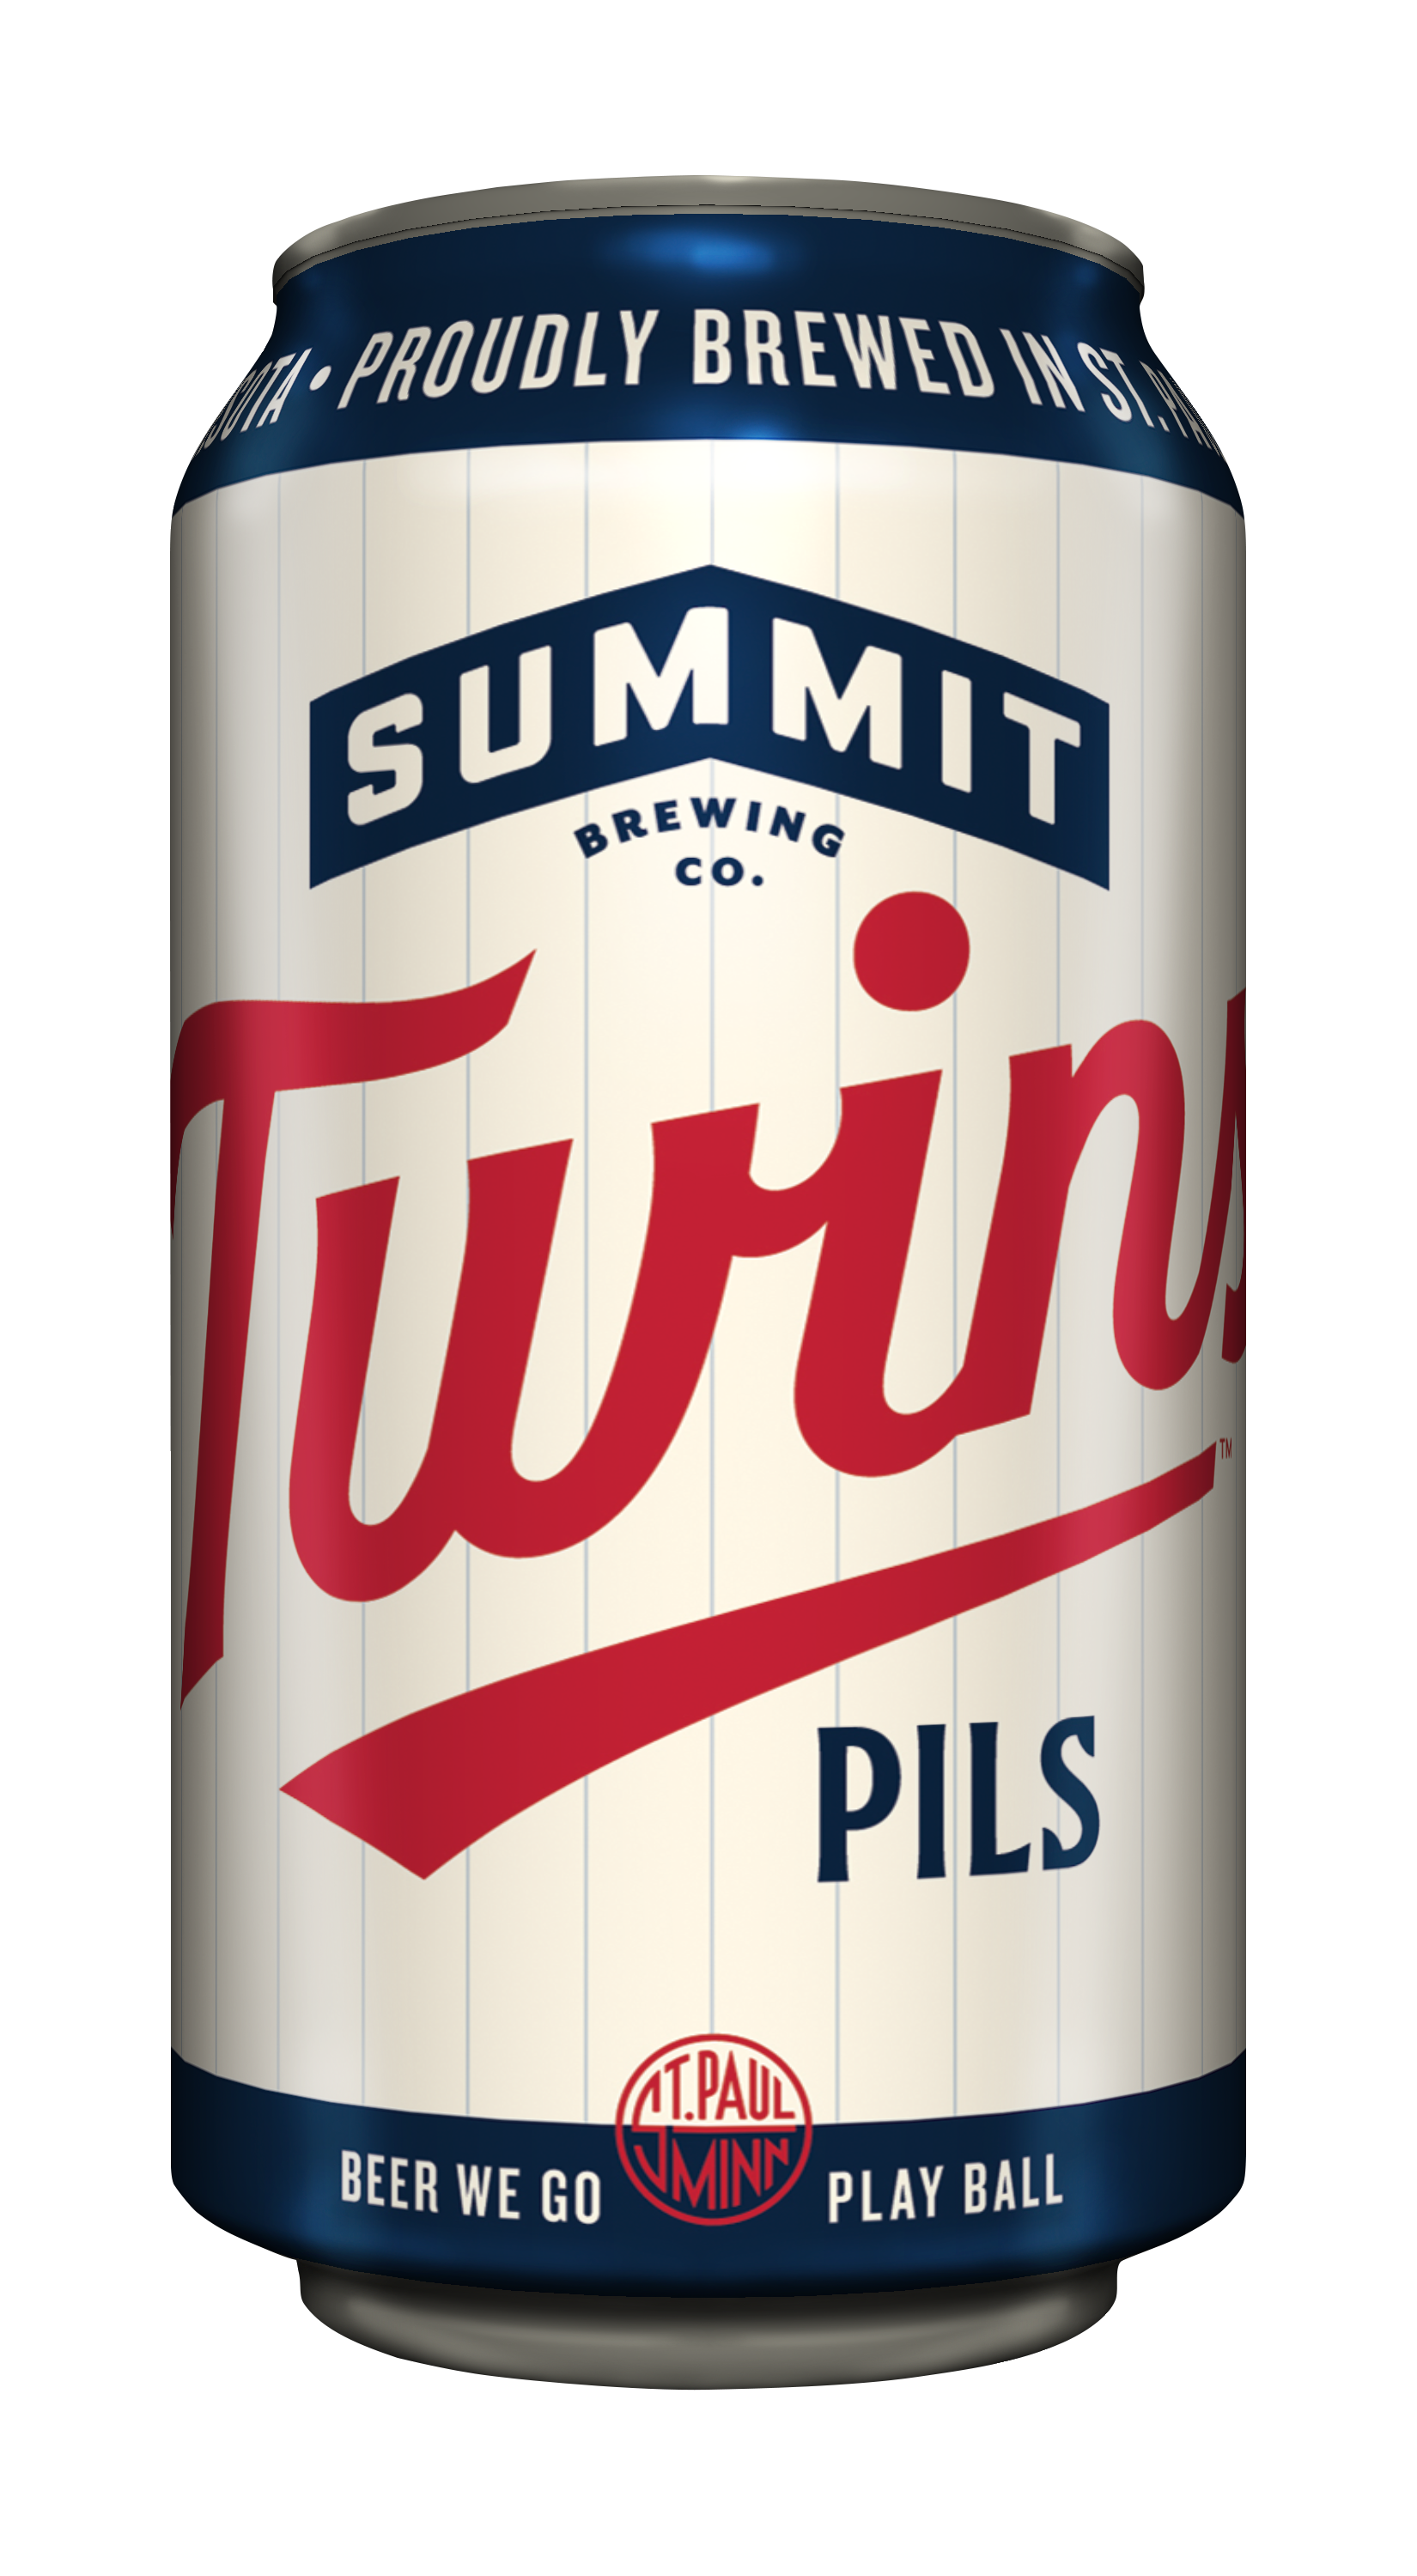 Updated Twins Pils 12oz can with a cream background, blue Summit chevron logo and featuring a red Twins script logo